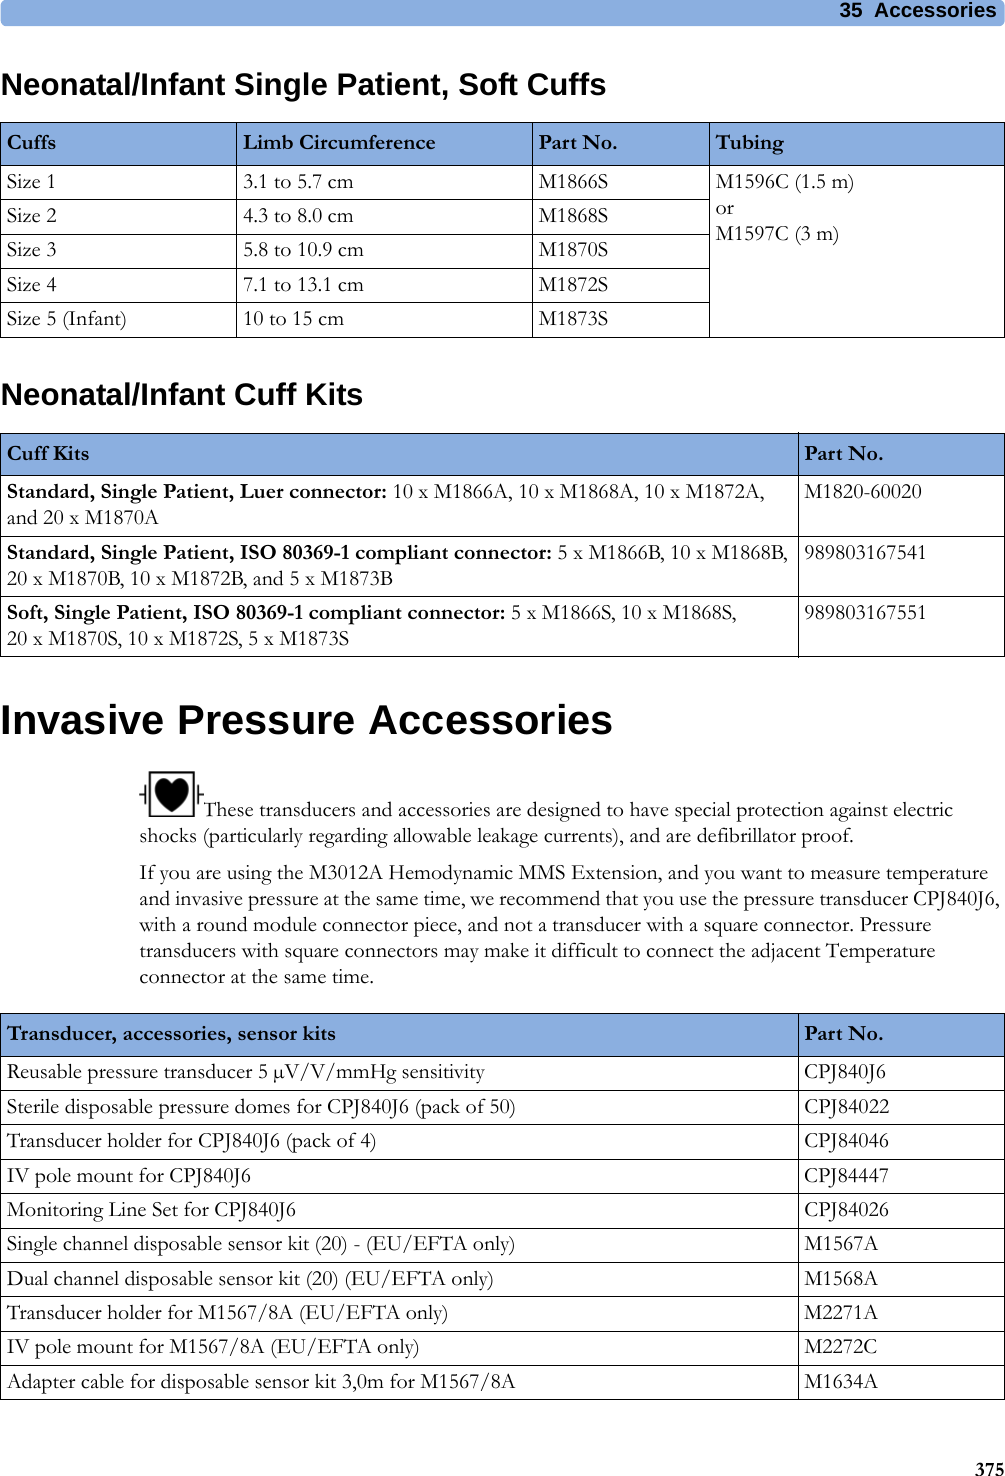 35 Accessories375Neonatal/Infant Single Patient, Soft CuffsNeonatal/Infant Cuff KitsInvasive Pressure AccessoriesThese transducers and accessories are designed to have special protection against electric shocks (particularly regarding allowable leakage currents), and are defibrillator proof.If you are using the M3012A Hemodynamic MMS Extension, and you want to measure temperature and invasive pressure at the same time, we recommend that you use the pressure transducer CPJ840J6, with a round module connector piece, and not a transducer with a square connector. Pressure transducers with square connectors may make it difficult to connect the adjacent Temperature connector at the same time.Cuffs Limb Circumference Part No. TubingSize 1 3.1 to 5.7 cm M1866S M1596C (1.5 m) orM1597C (3 m)Size 2 4.3 to 8.0 cm M1868SSize 3 5.8 to 10.9 cm M1870SSize 4 7.1 to 13.1 cm M1872SSize 5 (Infant) 10 to 15 cm M1873SCuff Kits Part No.Standard, Single Patient, Luer connector: 10 x M1866A, 10 x M1868A, 10 x M1872A, and 20 x M1870AM1820-60020Standard, Single Patient, ISO 80369-1 compliant connector: 5 x M1866B, 10 x M1868B, 20 x M1870B, 10 x M1872B, and 5 x M1873B989803167541Soft, Single Patient, ISO 80369-1 compliant connector: 5 x M1866S, 10 x M1868S, 20 x M1870S, 10 x M1872S, 5 x M1873S989803167551Transducer, accessories, sensor kits Part No.Reusable pressure transducer 5 µV/V/mmHg sensitivity CPJ840J6Sterile disposable pressure domes for CPJ840J6 (pack of 50) CPJ84022Transducer holder for CPJ840J6 (pack of 4) CPJ84046IV pole mount for CPJ840J6 CPJ84447Monitoring Line Set for CPJ840J6 CPJ84026Single channel disposable sensor kit (20) - (EU/EFTA only) M1567ADual channel disposable sensor kit (20) (EU/EFTA only) M1568ATransducer holder for M1567/8A (EU/EFTA only) M2271AIV pole mount for M1567/8A (EU/EFTA only) M2272CAdapter cable for disposable sensor kit 3,0m for M1567/8A M1634A